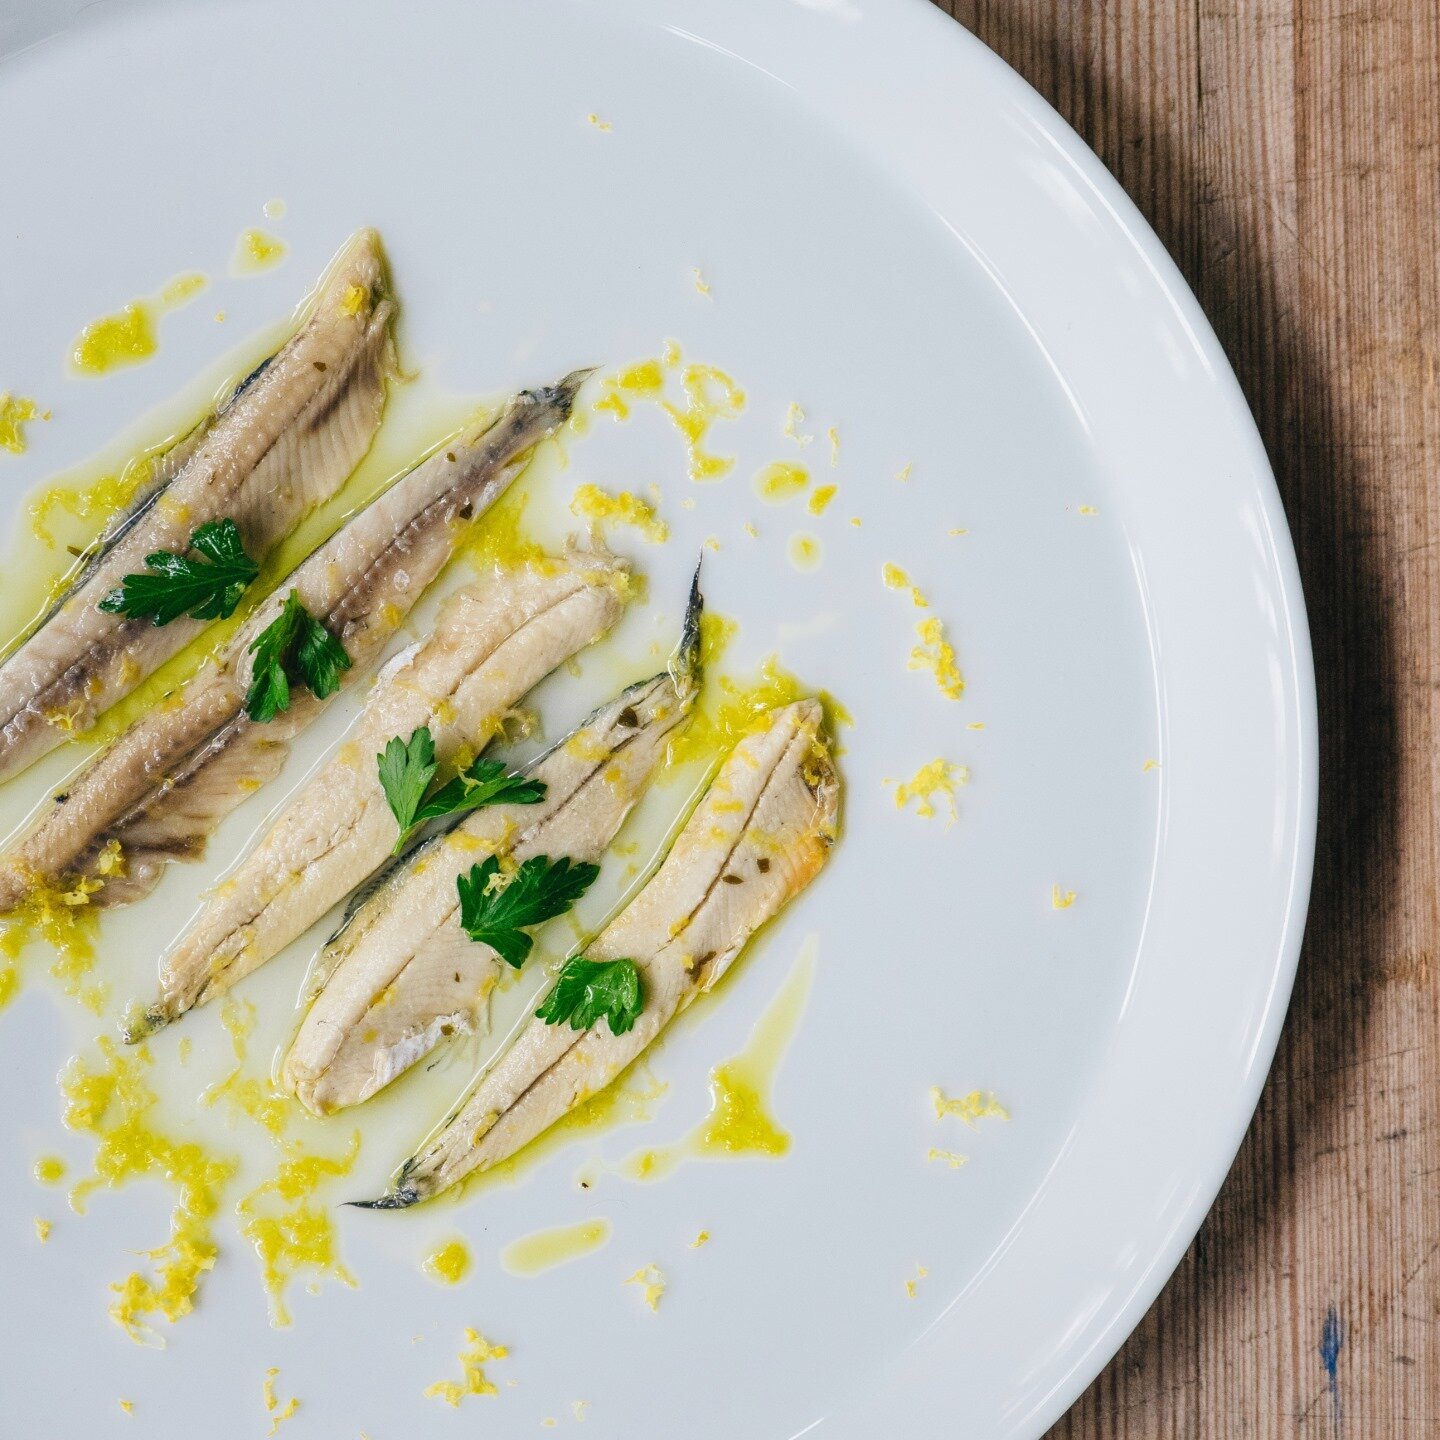 🐟 &middot; Boquerones y Patatas Fritas

Herb marinated White Anchovies served with our beloved house potato chips, one of our favorite pintxos. #laurelonrutledge